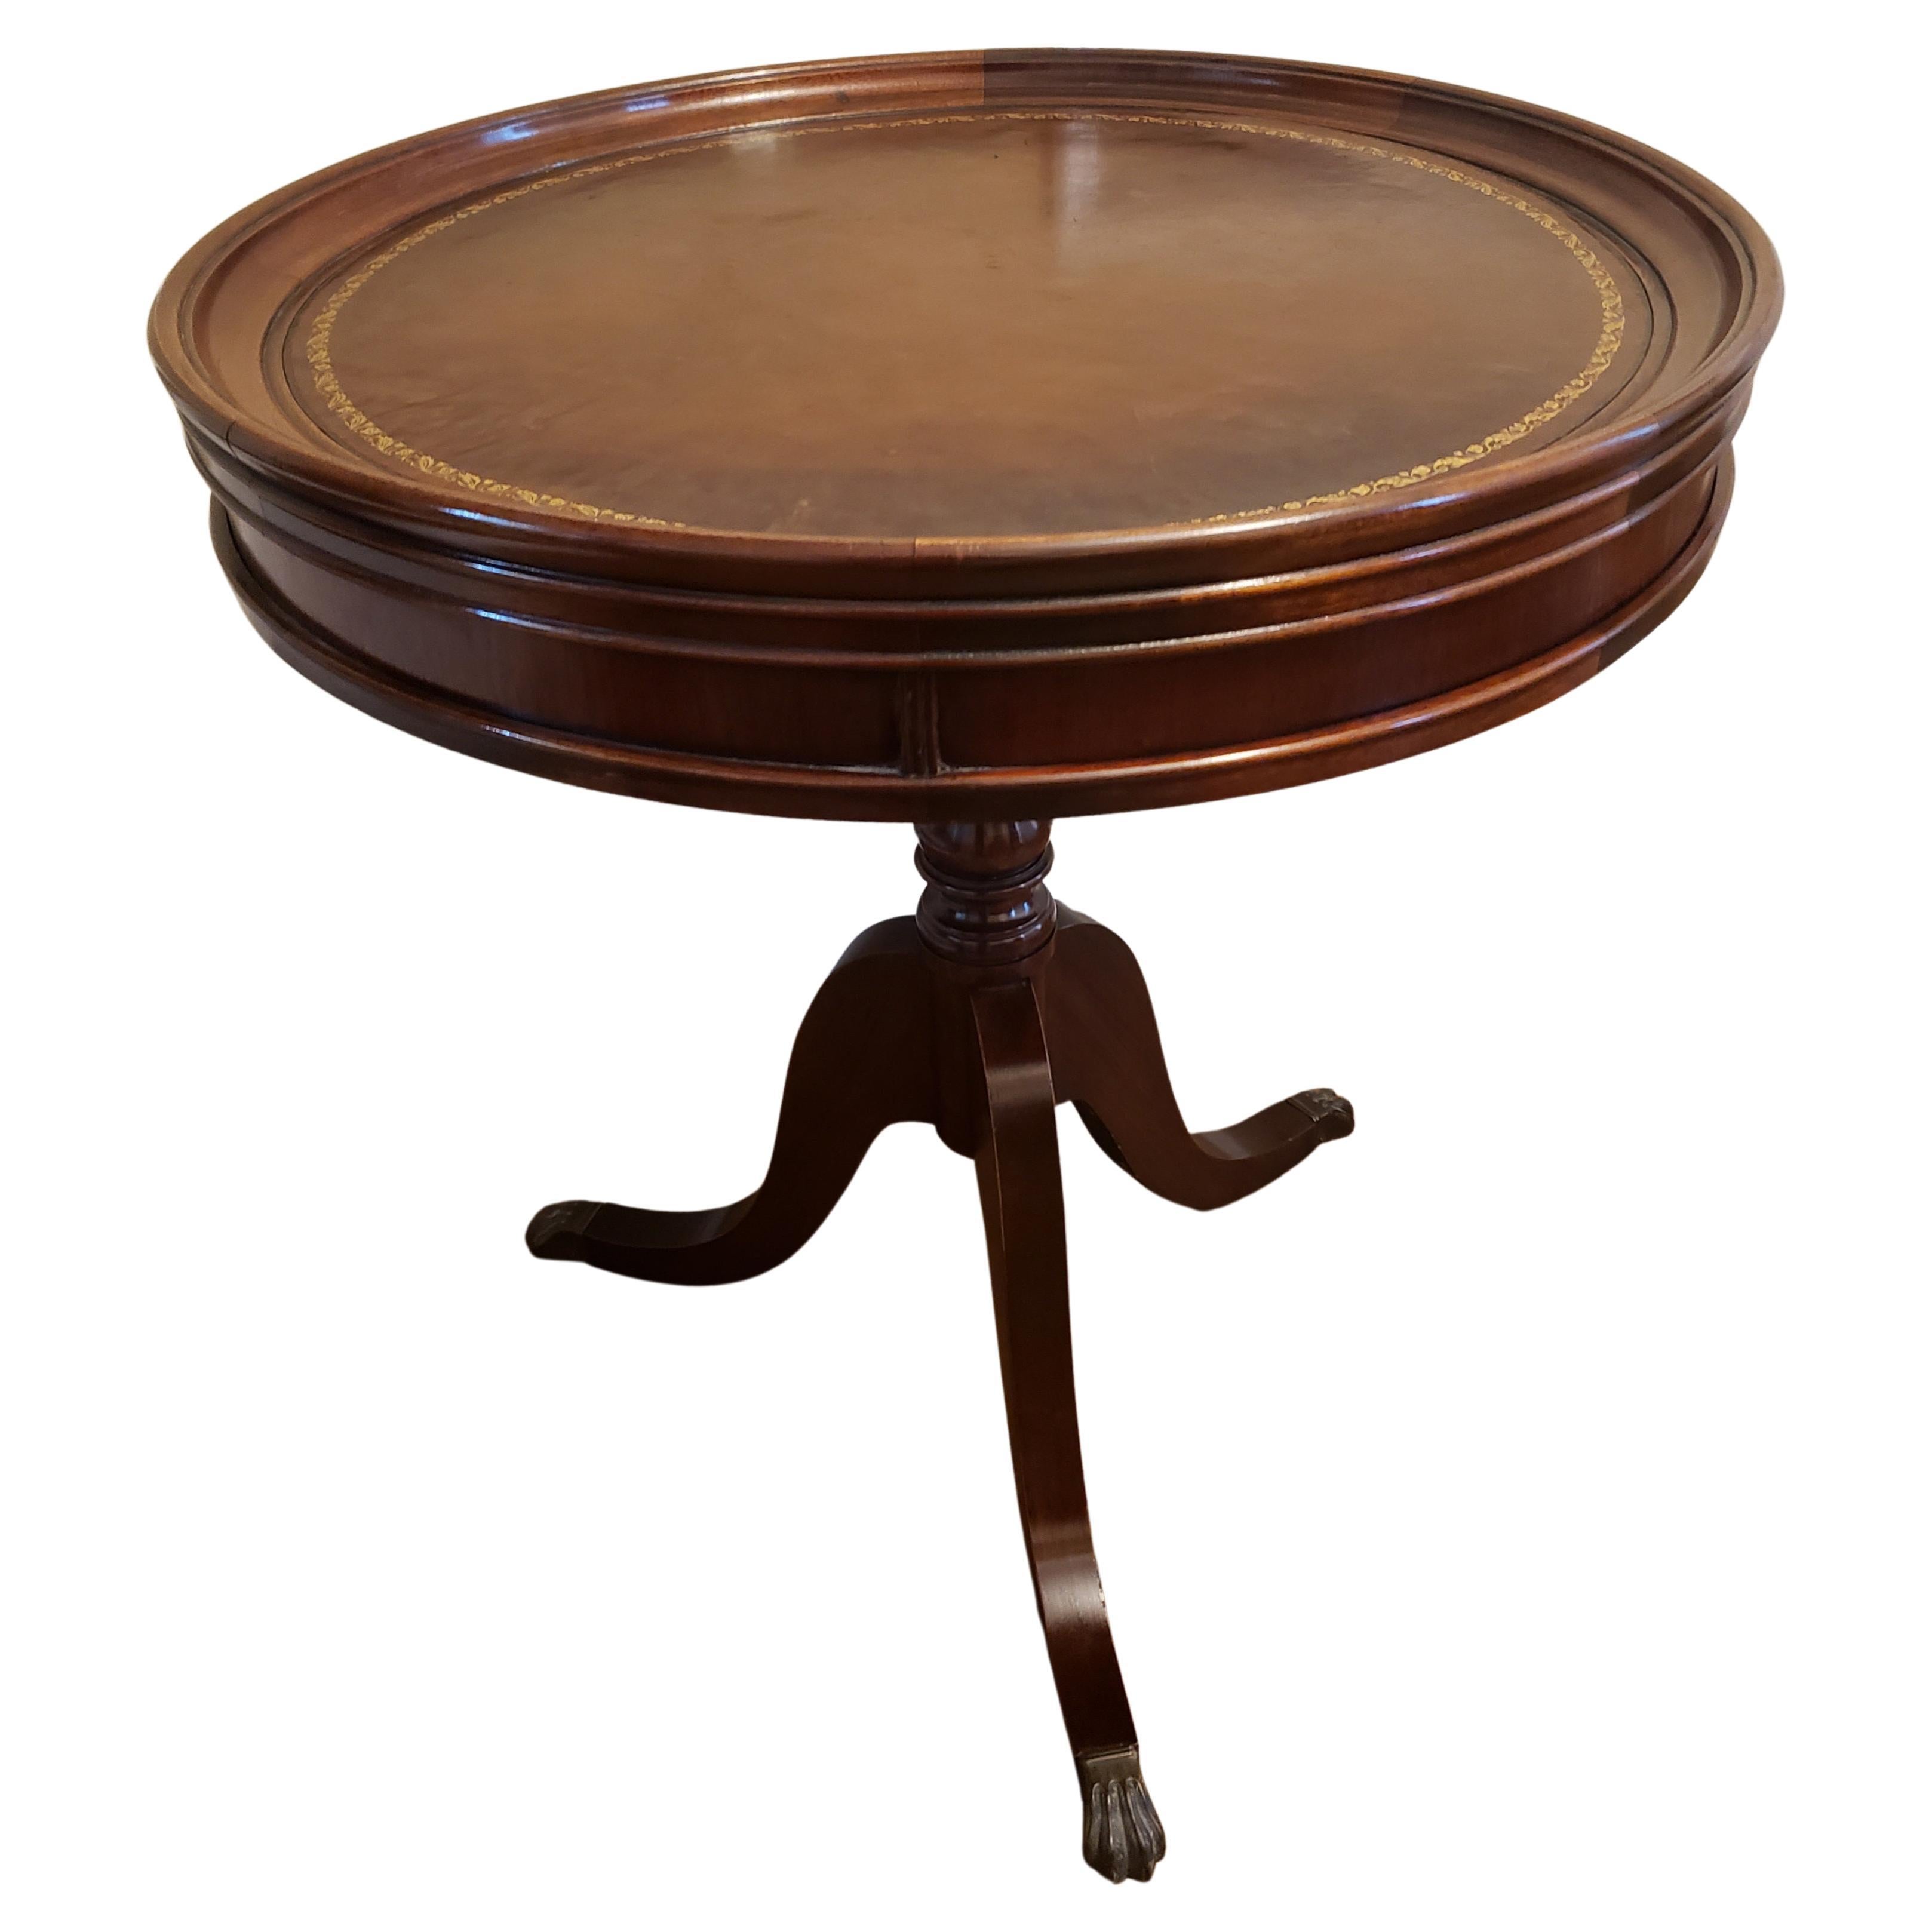 A well kept 1960s Regency Mahogany and Tooled Leather Stencil tripod Pedestal Tea Drum Table with brass paw feet. Measures 25.5